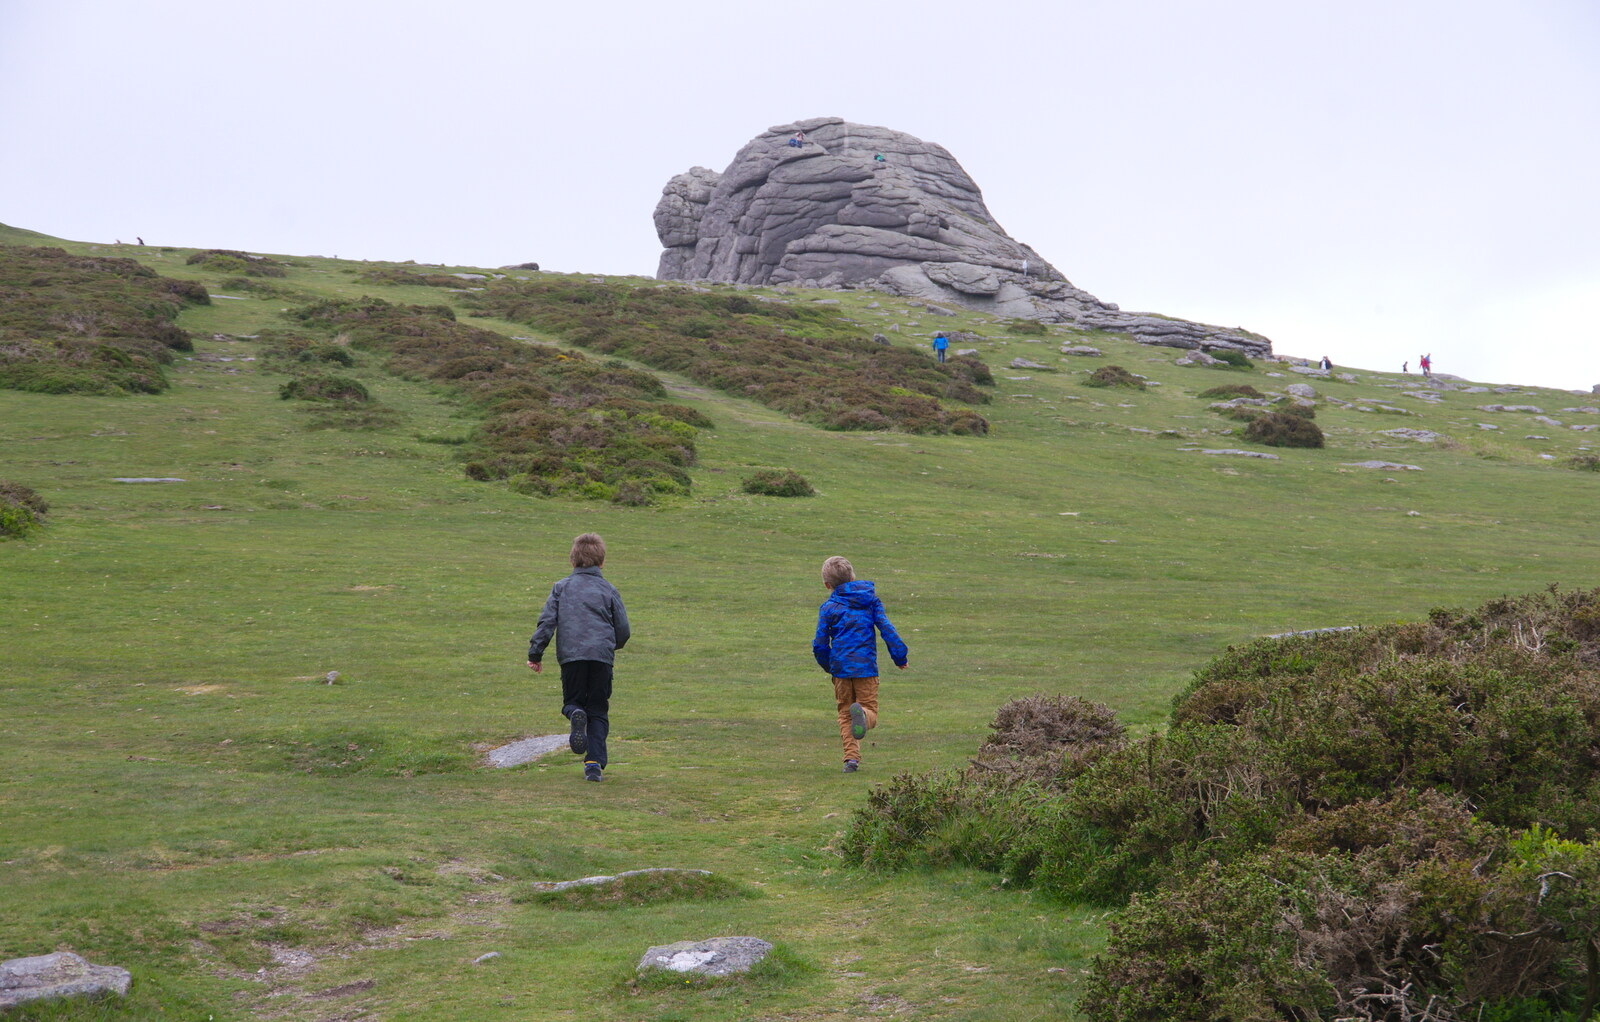 The boys run off from The Tom Cobley and a Return to Haytor, Bovey Tracey, Devon - 27th May 2019